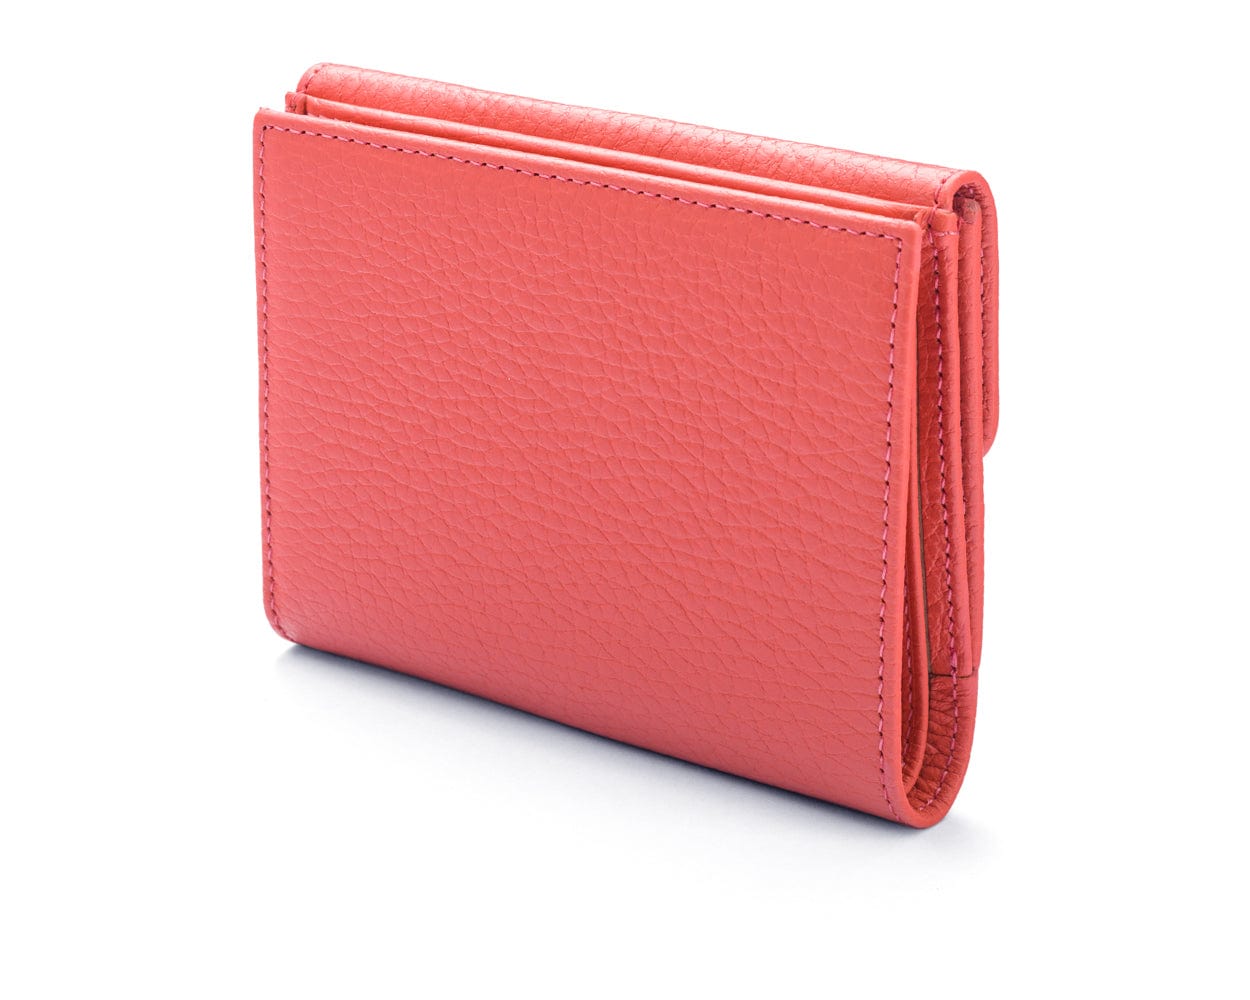 RFID leather purse, pink, front